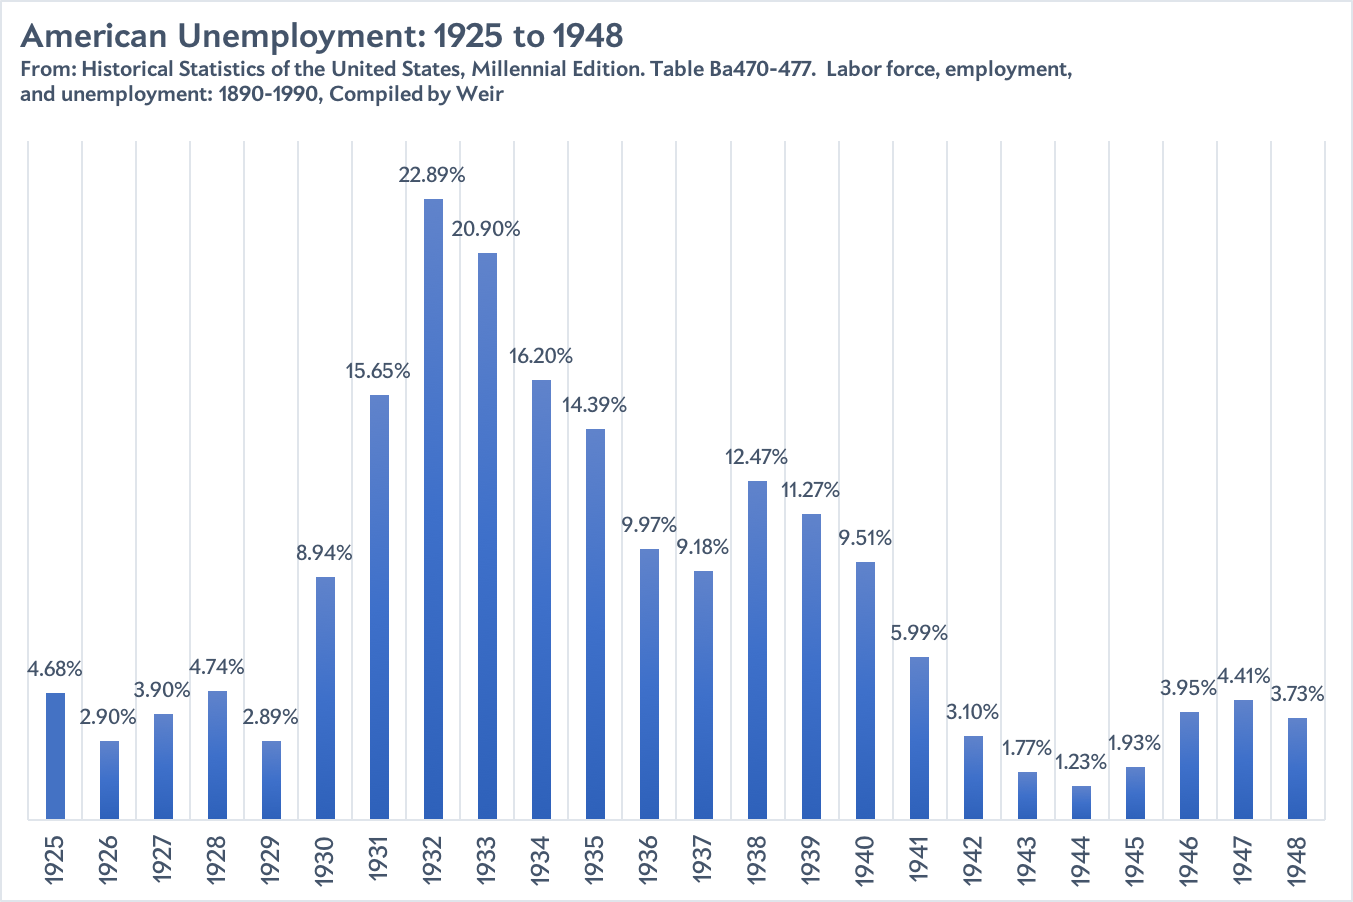 A bar graph showing the U.S. unemployment rate from 1925 through 1948. 